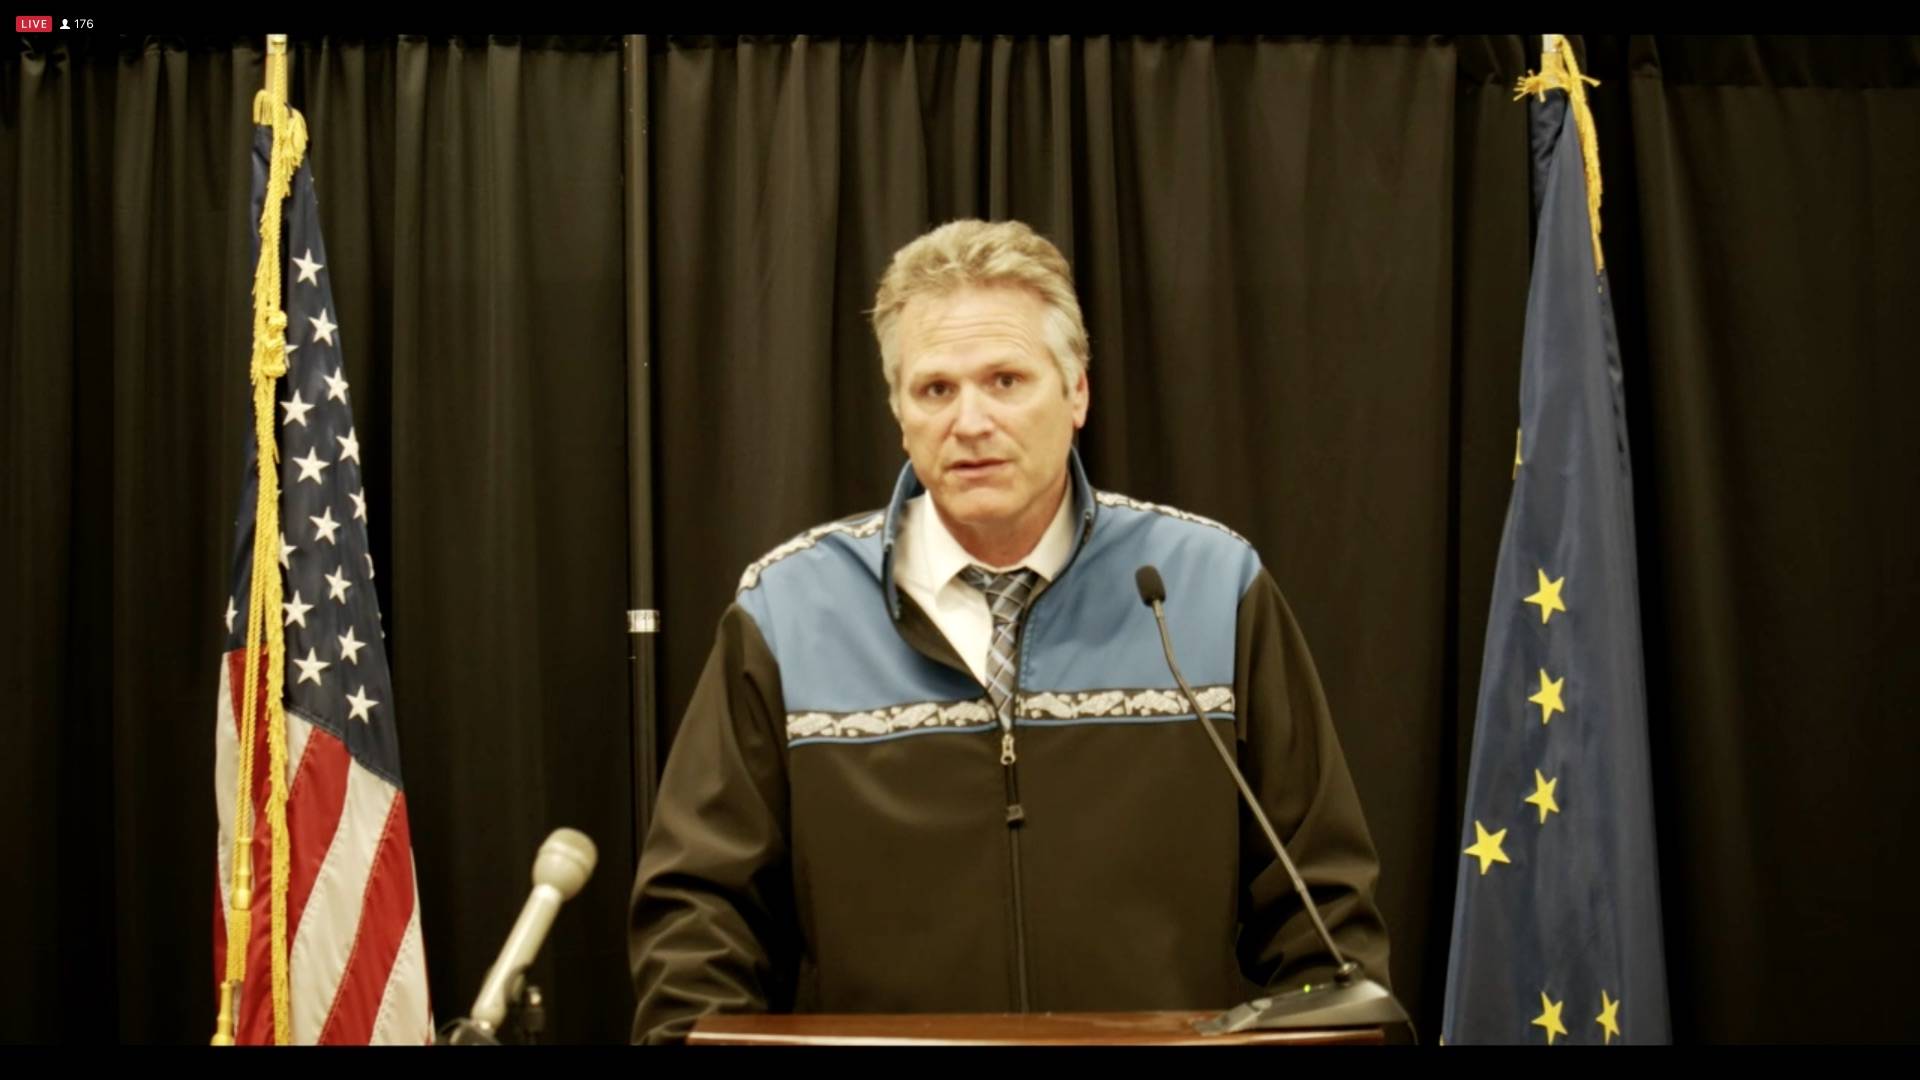 Gov. Mike Dunleavy speaks at a press conference about the COVID-19 pandemic on Thursday, Aug. 26, 2021 from Anchorage, Alaska. (Ashlyn O’Hara/Peninsula Clarion)